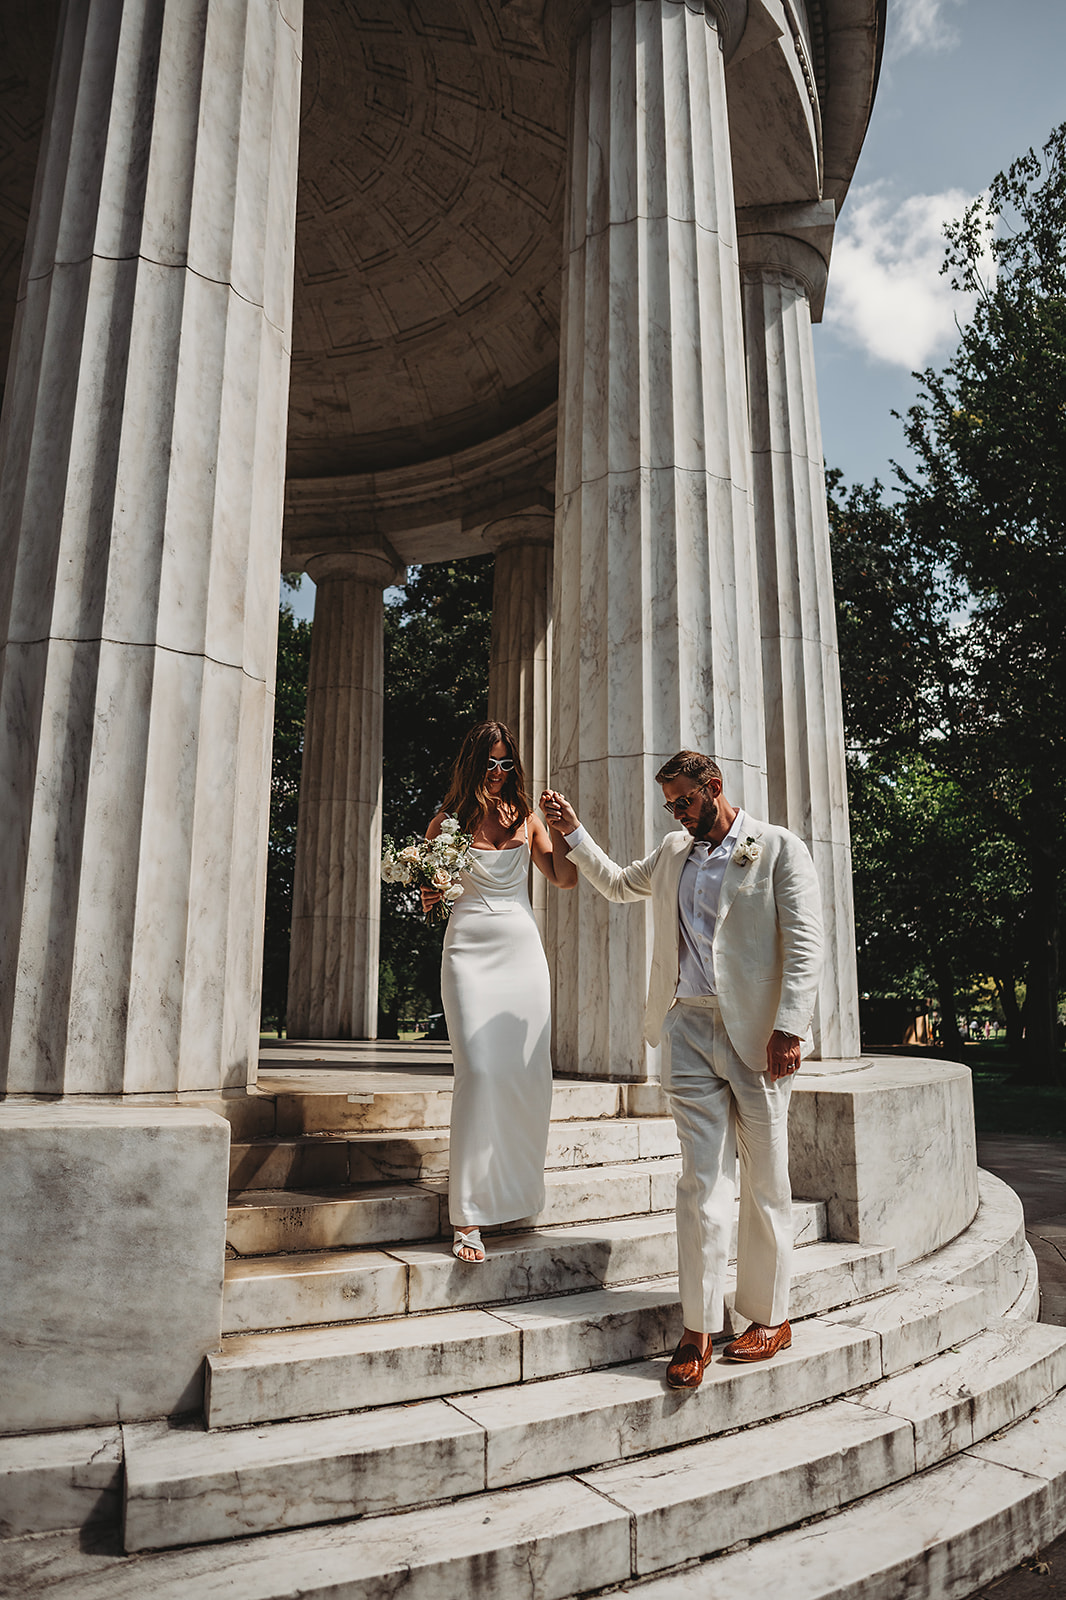 Baltimore wedding photographer captures groom leading bride down stairs during bridal portraits